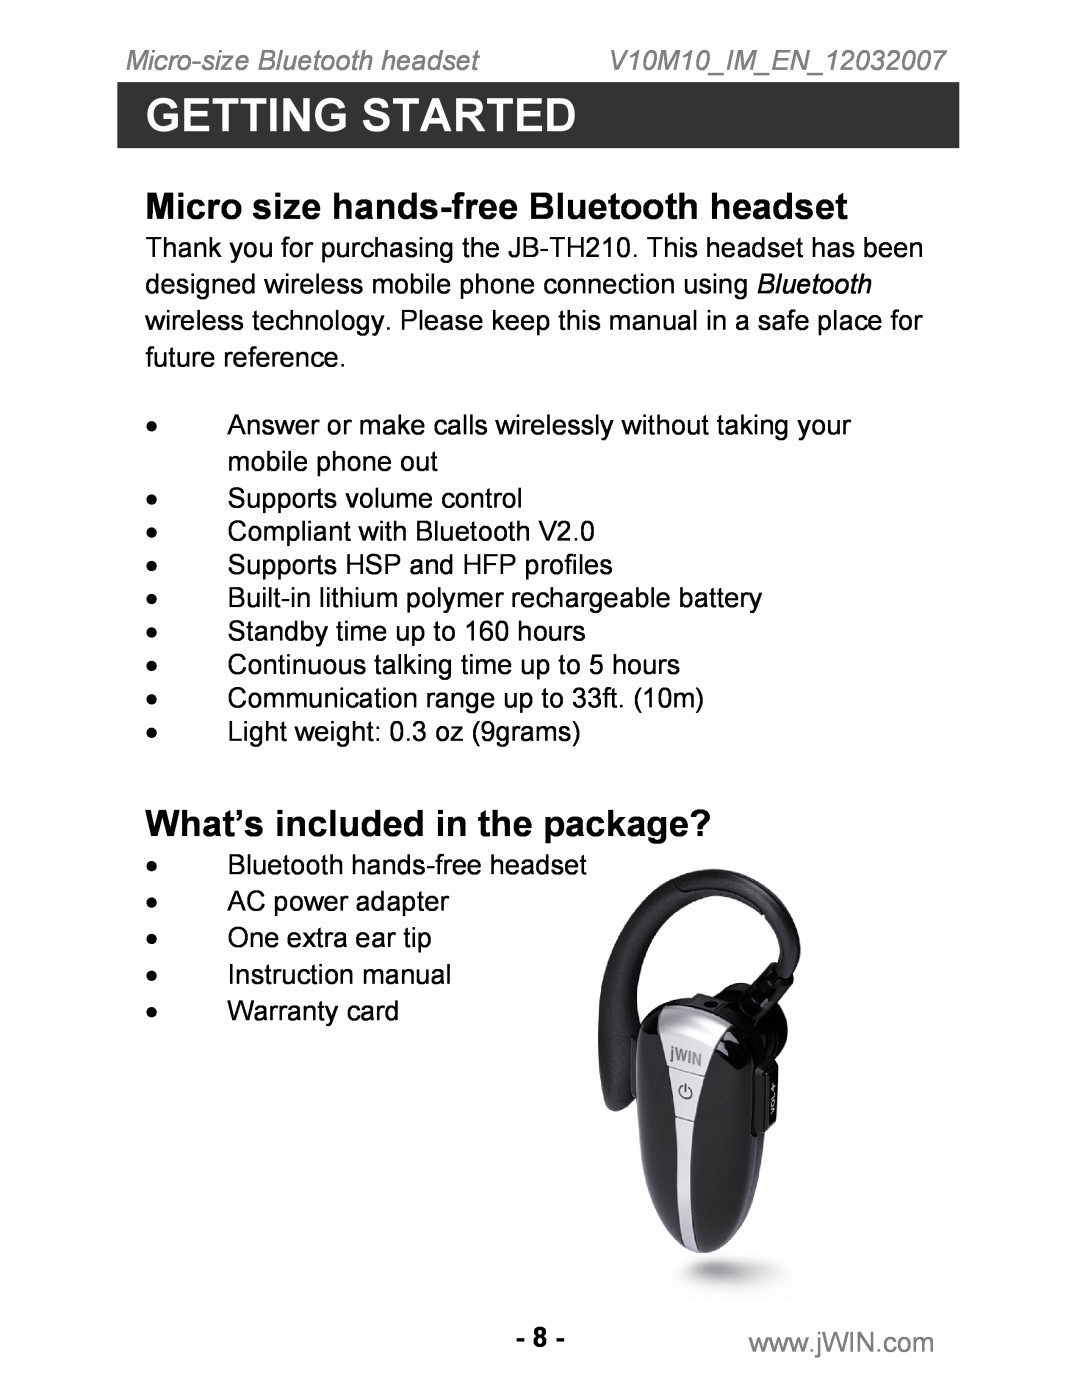 Jwin JB-TH210 instruction manual Getting Started, Micro size hands-freeBluetooth headset, What’s included in the package? 